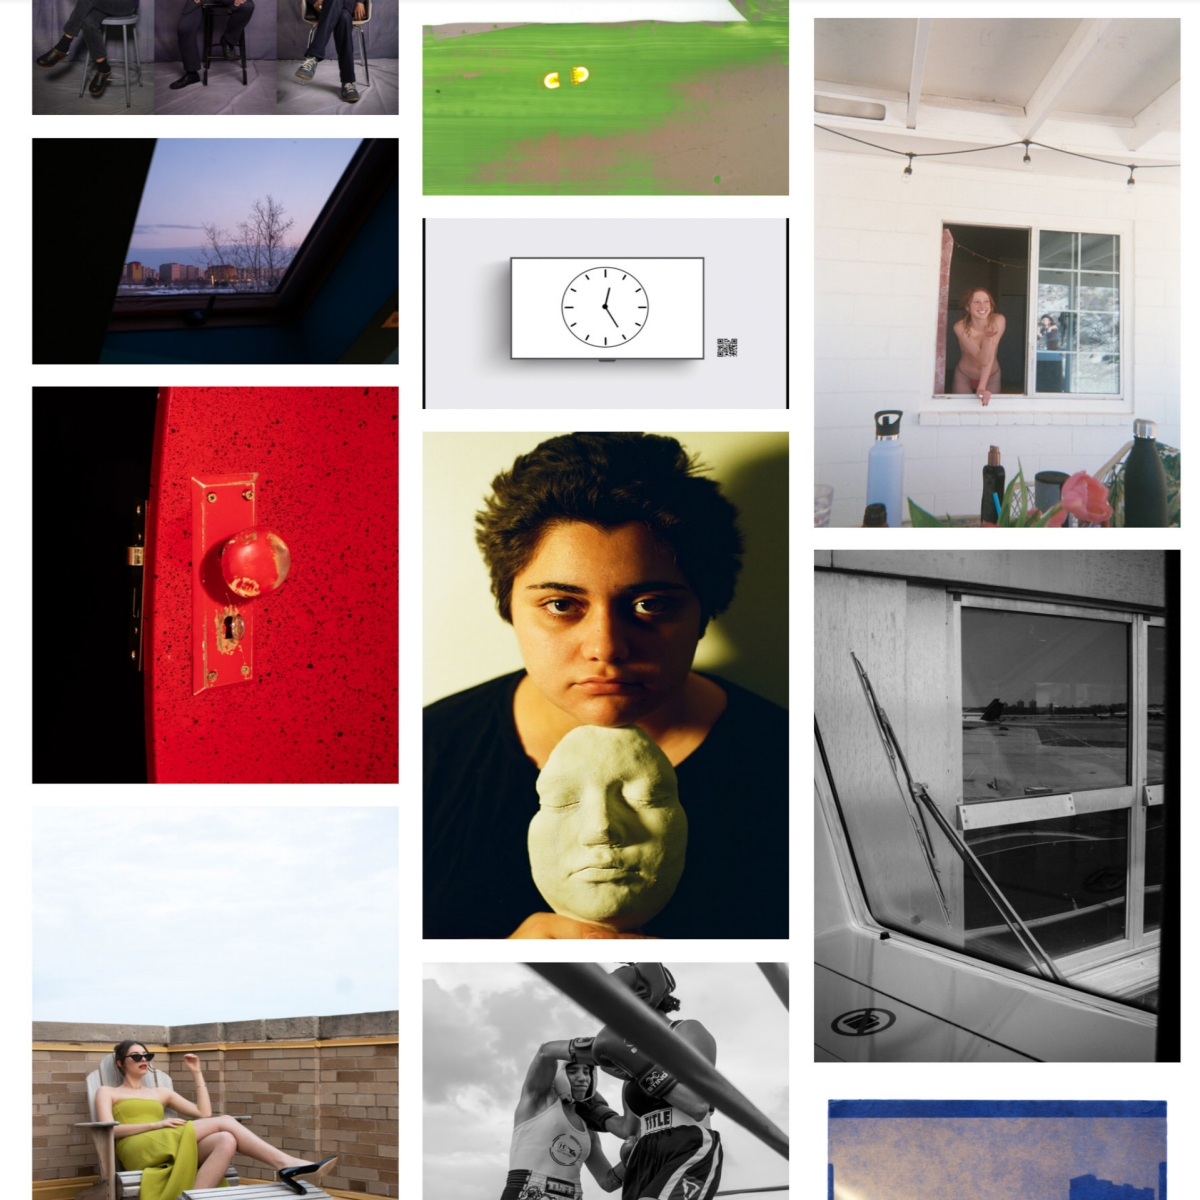 DPI 2022 BFA Virtual Exhibition grid of images including portraits, objects, landscapes, environmental photos